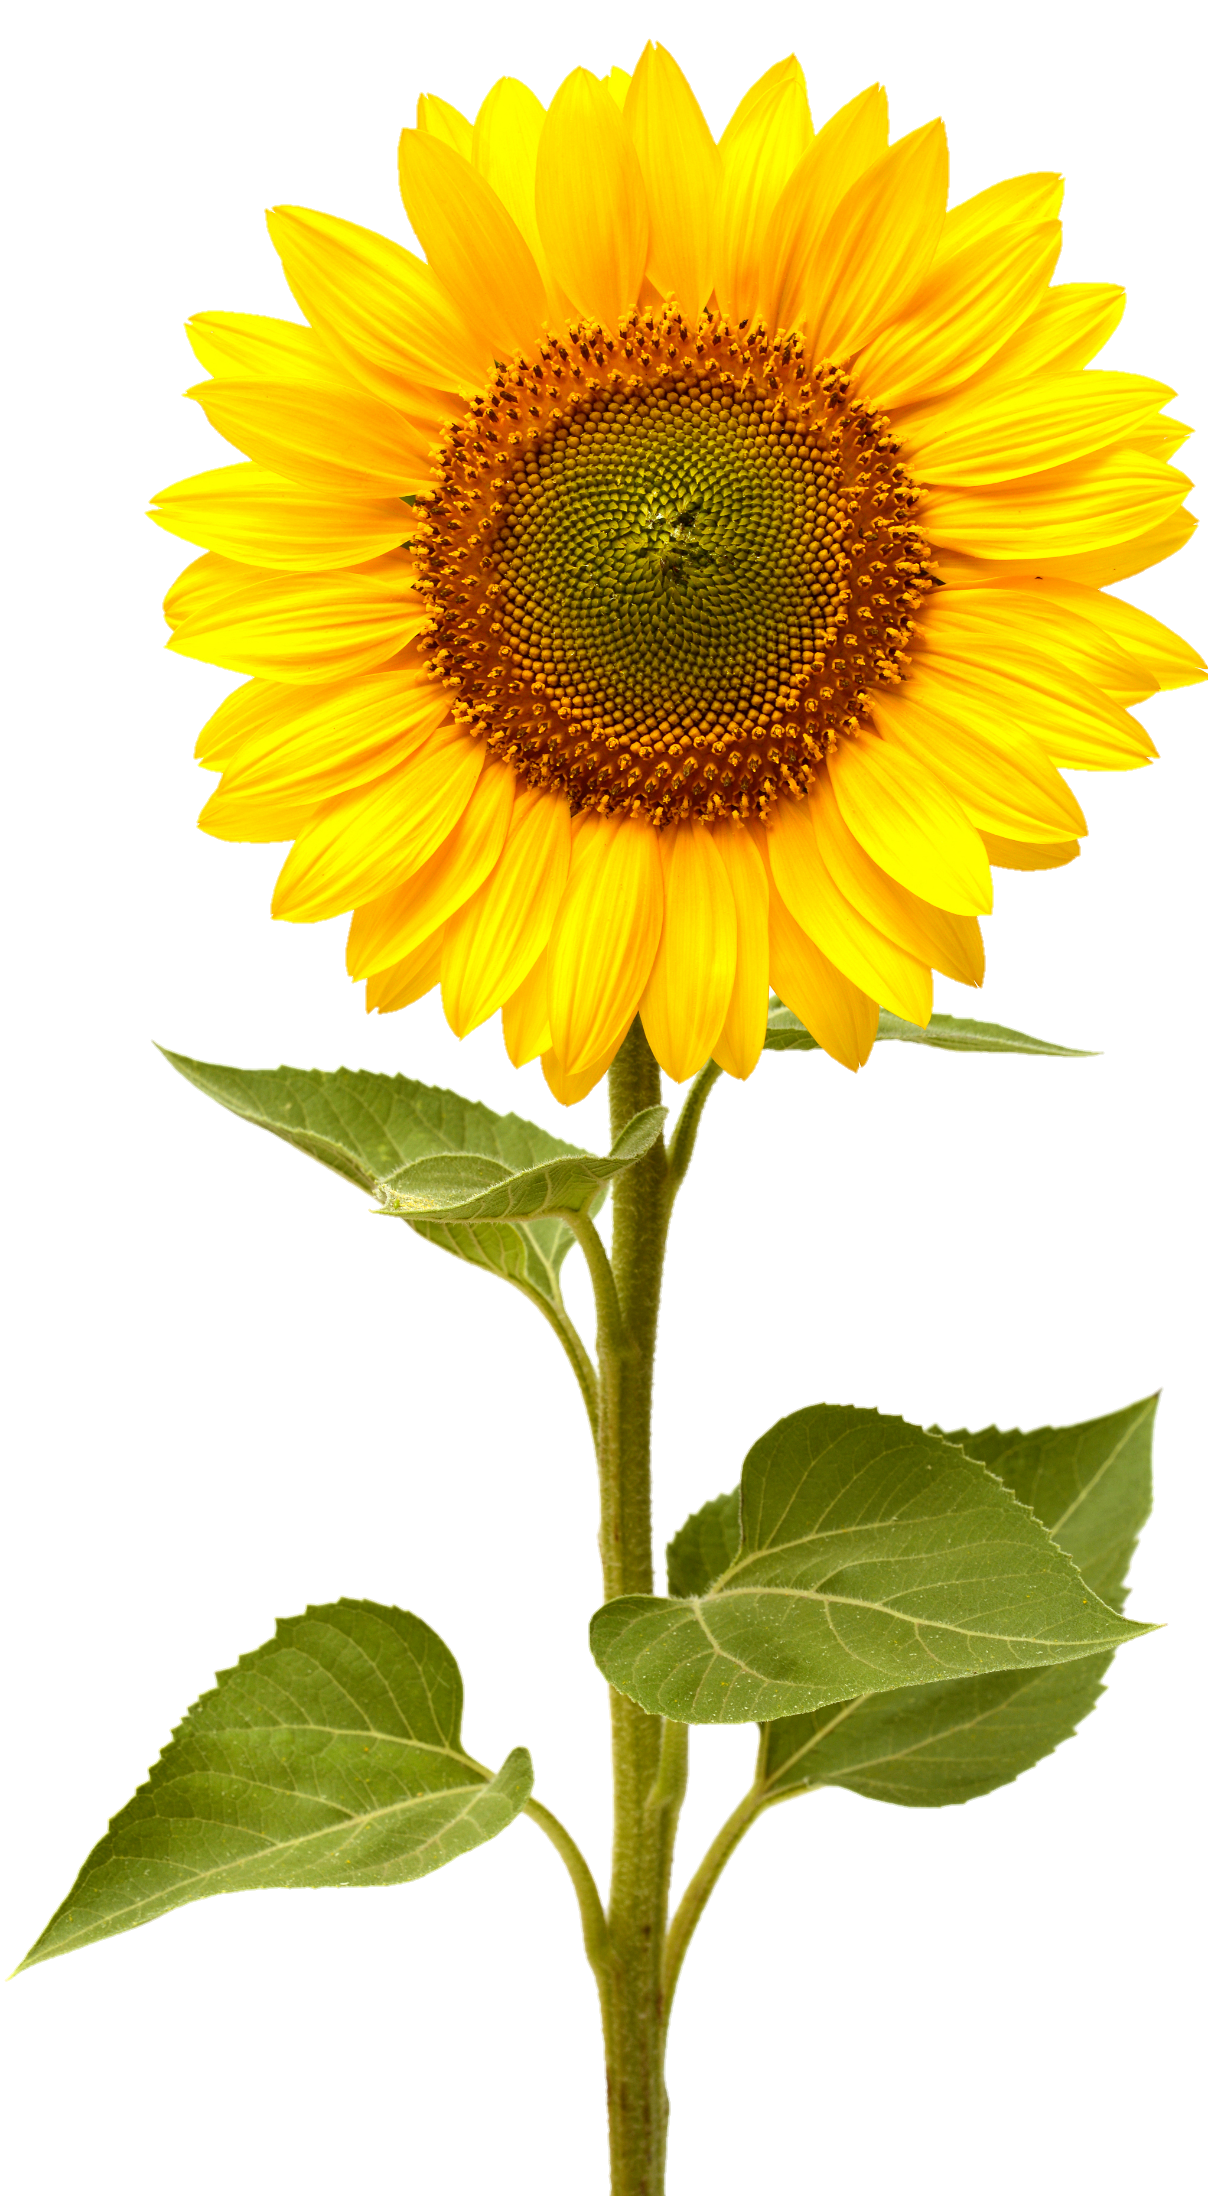 sunflower-png-image-from-pngfre-7